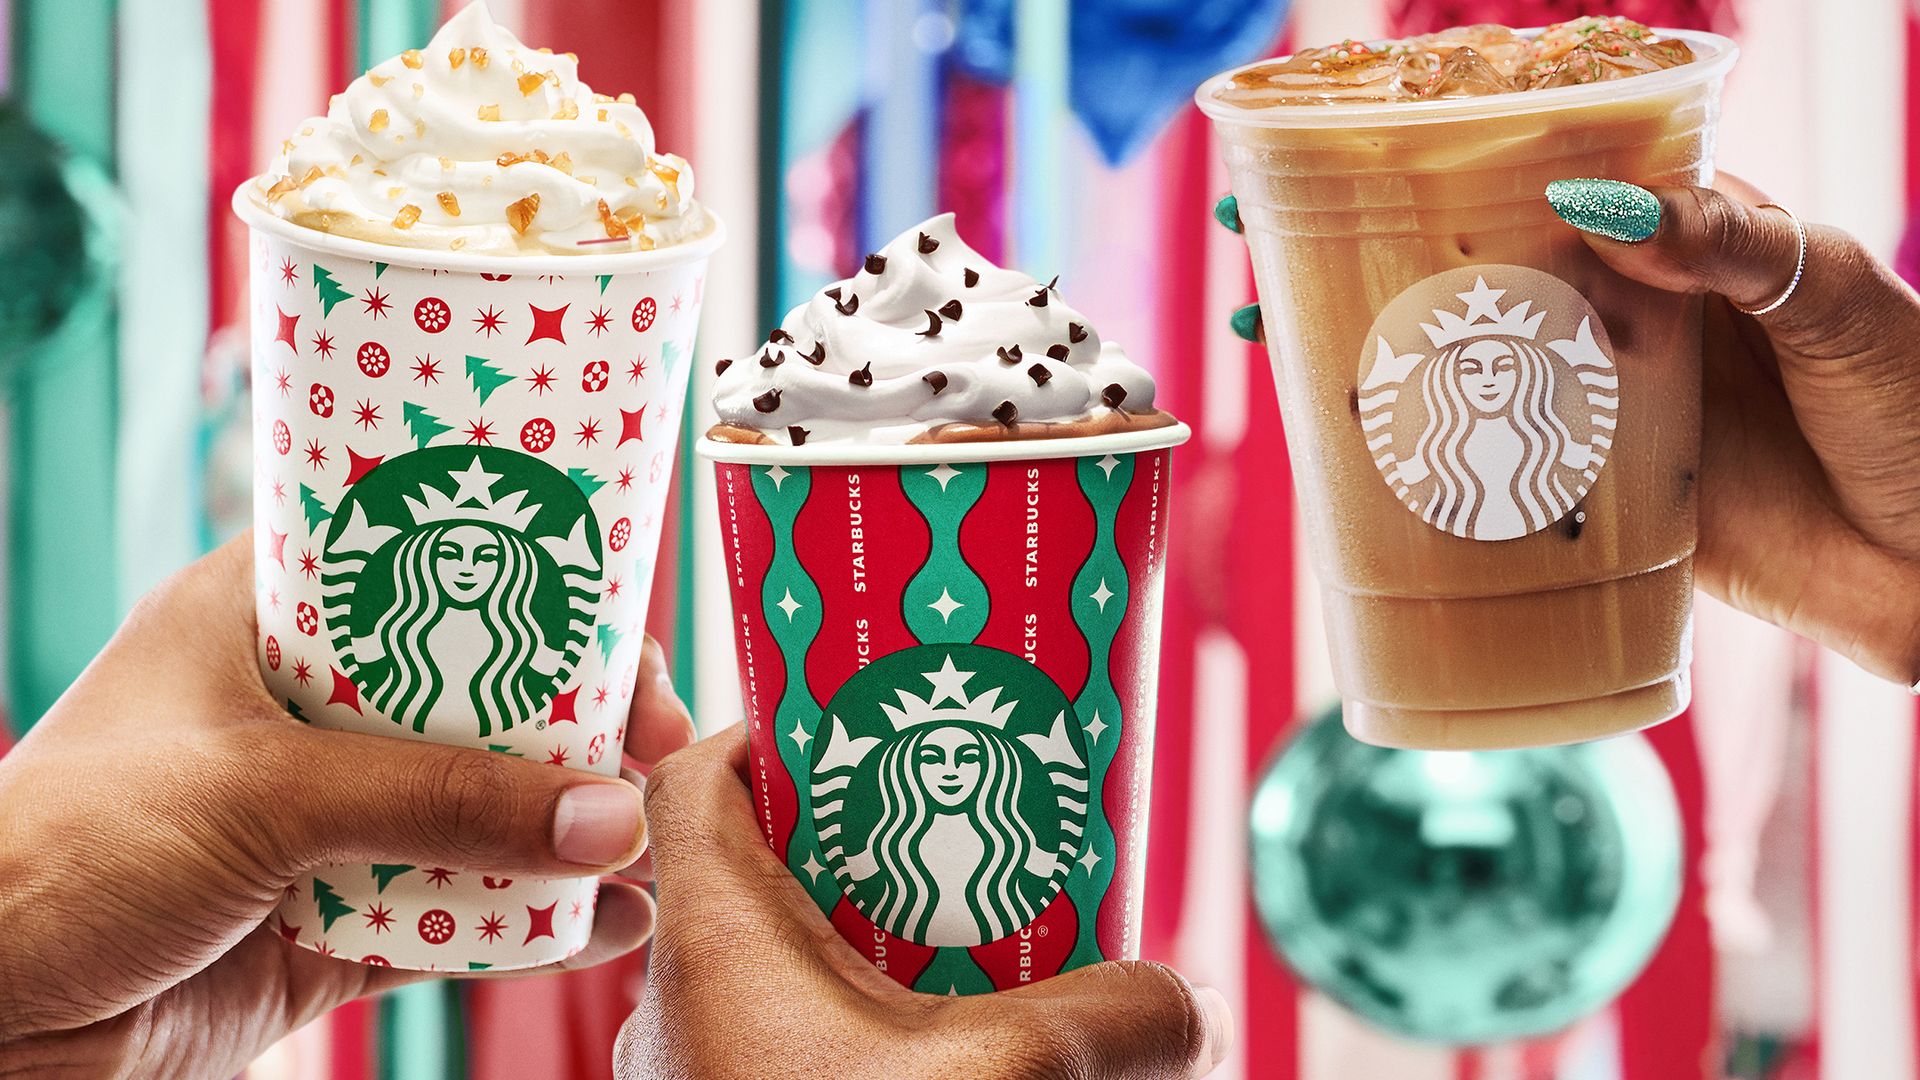 Starbucks holiday cup comes with a message: 'Give Good